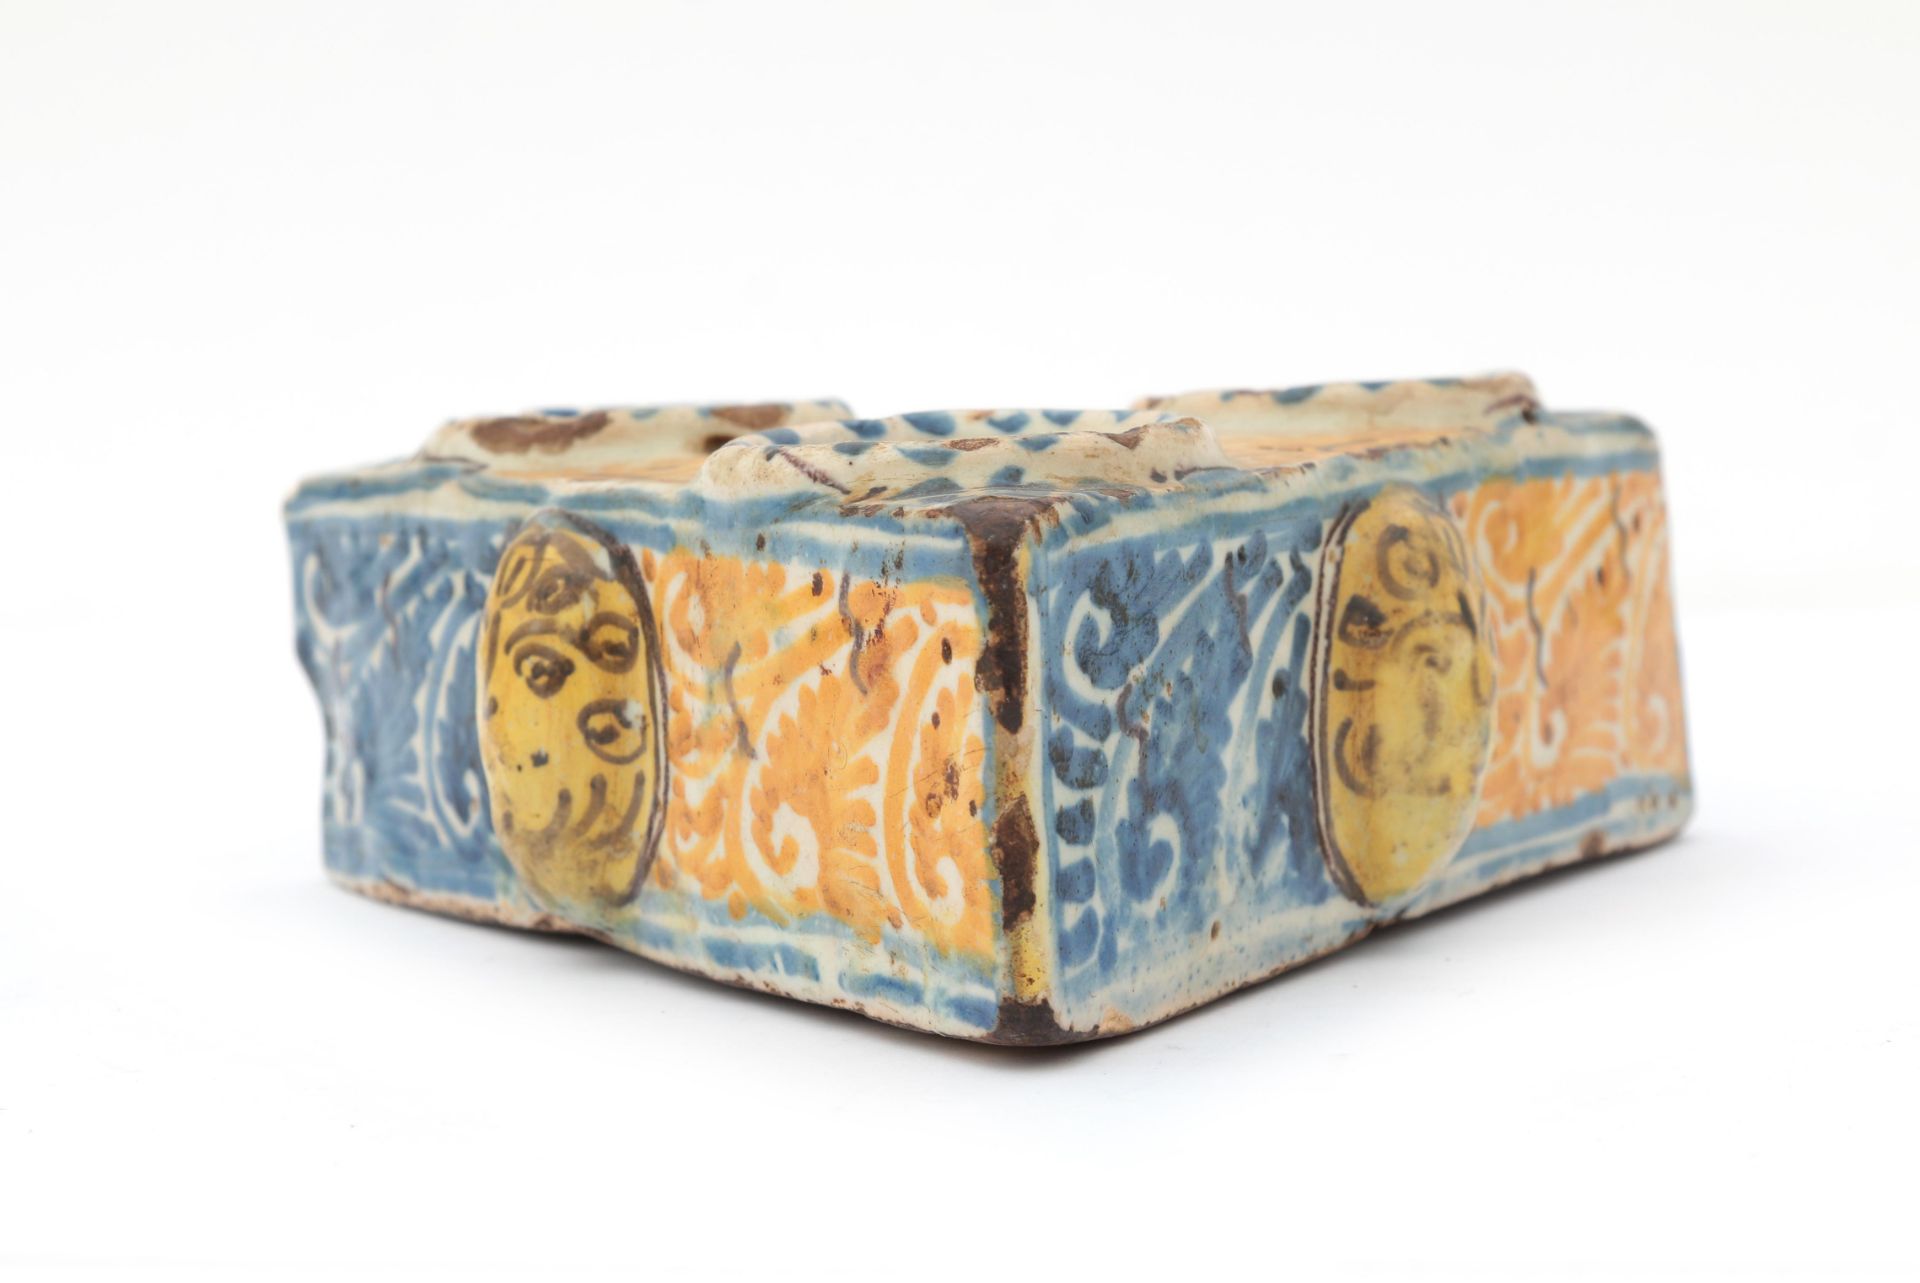 A Talavera majolica spice holder / salt cellar with decor in blue and yellow, adorned with - Image 4 of 5